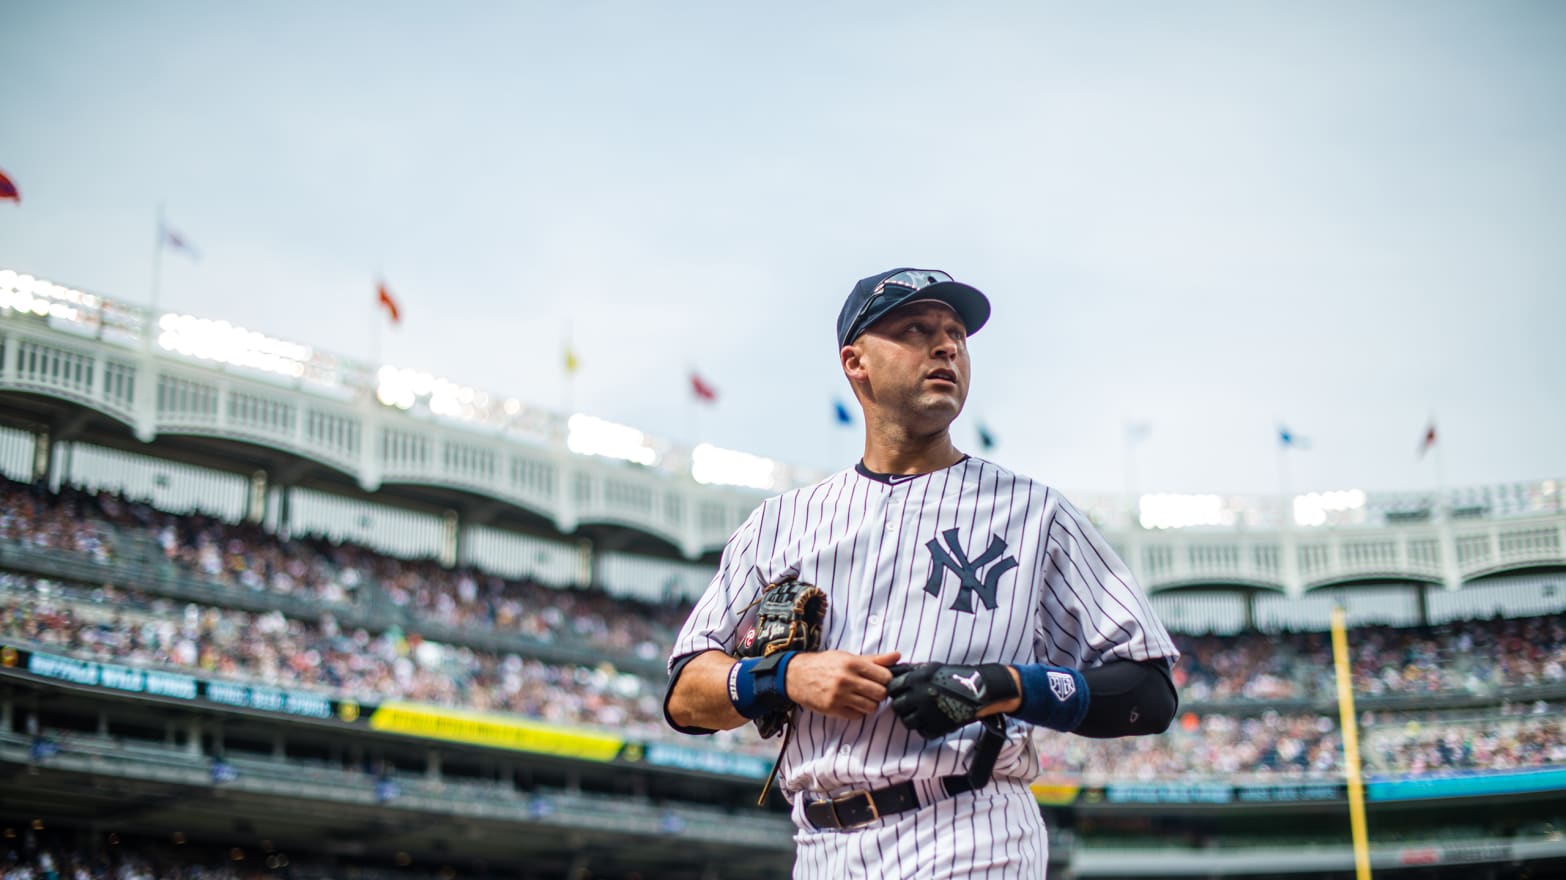 Derek Jeter now has more Gold Glove awards than all but four